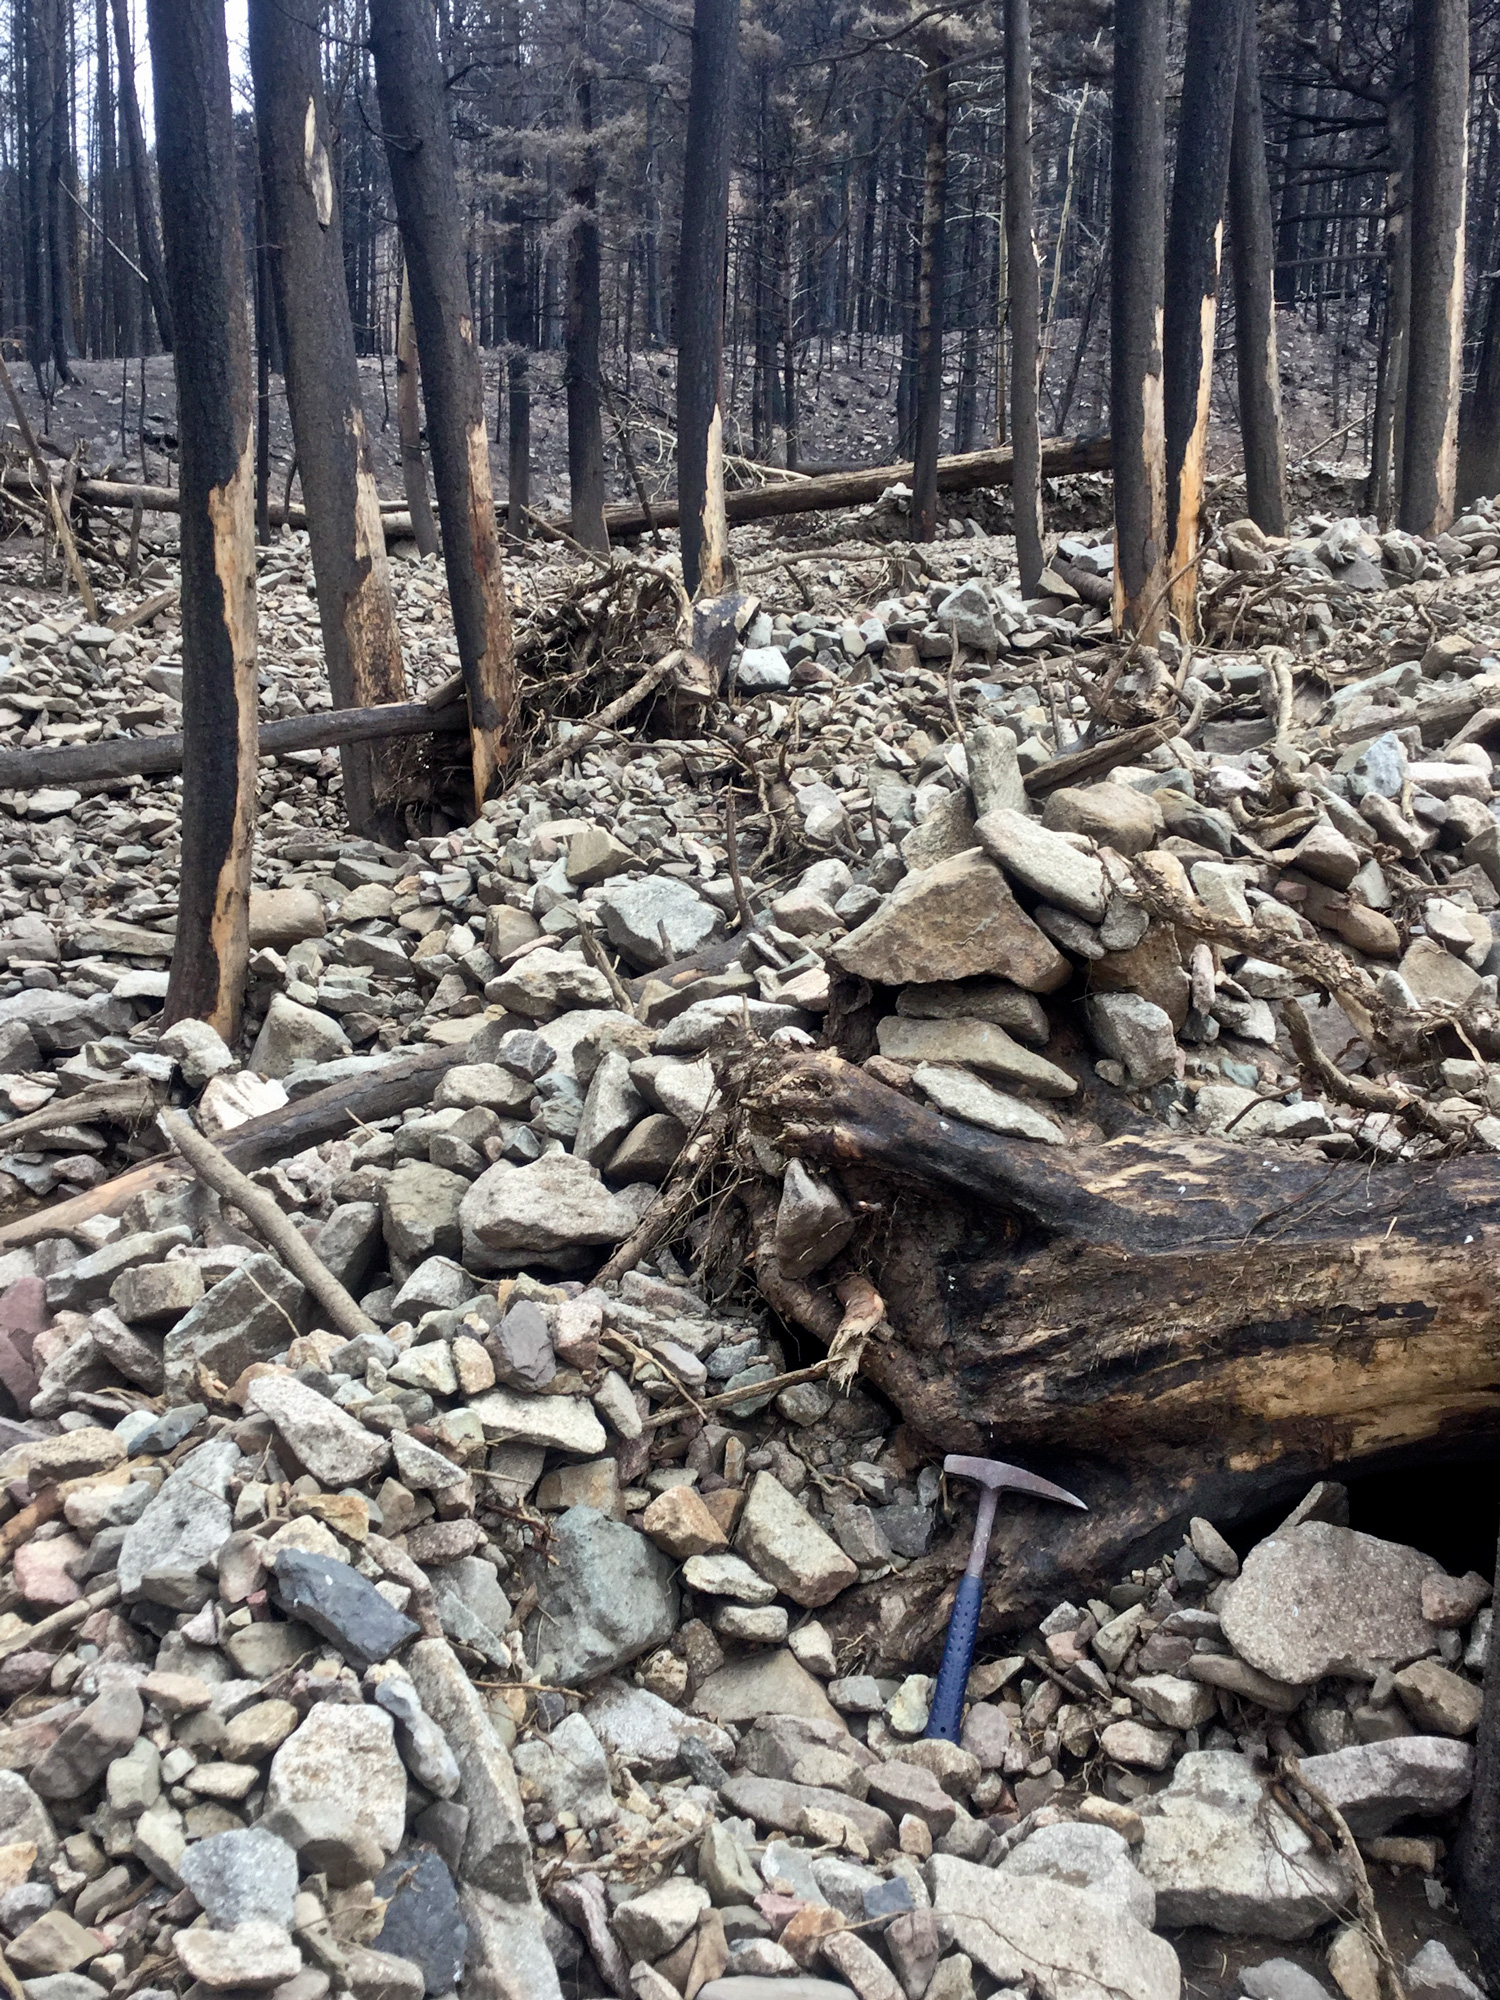 Post-wildfire debris flow deposited in burn area below a steep mountain grade, Paradise Acres, Huerfano County, Colorado, 2018. Photo credit: Kevin McCoy for the CGS.